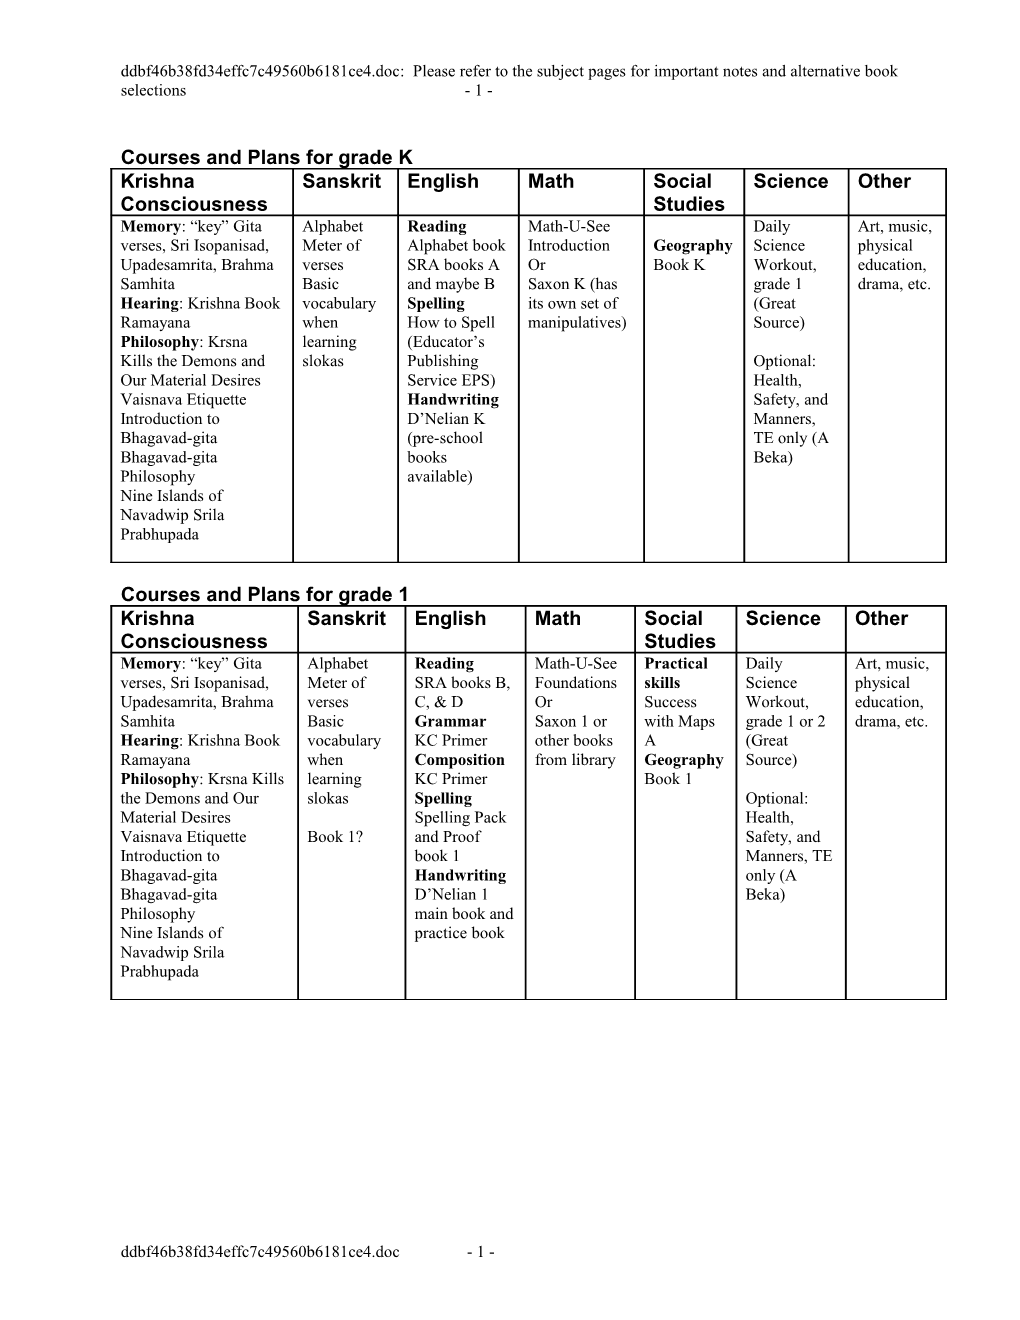 Courses and Plans for Grade K